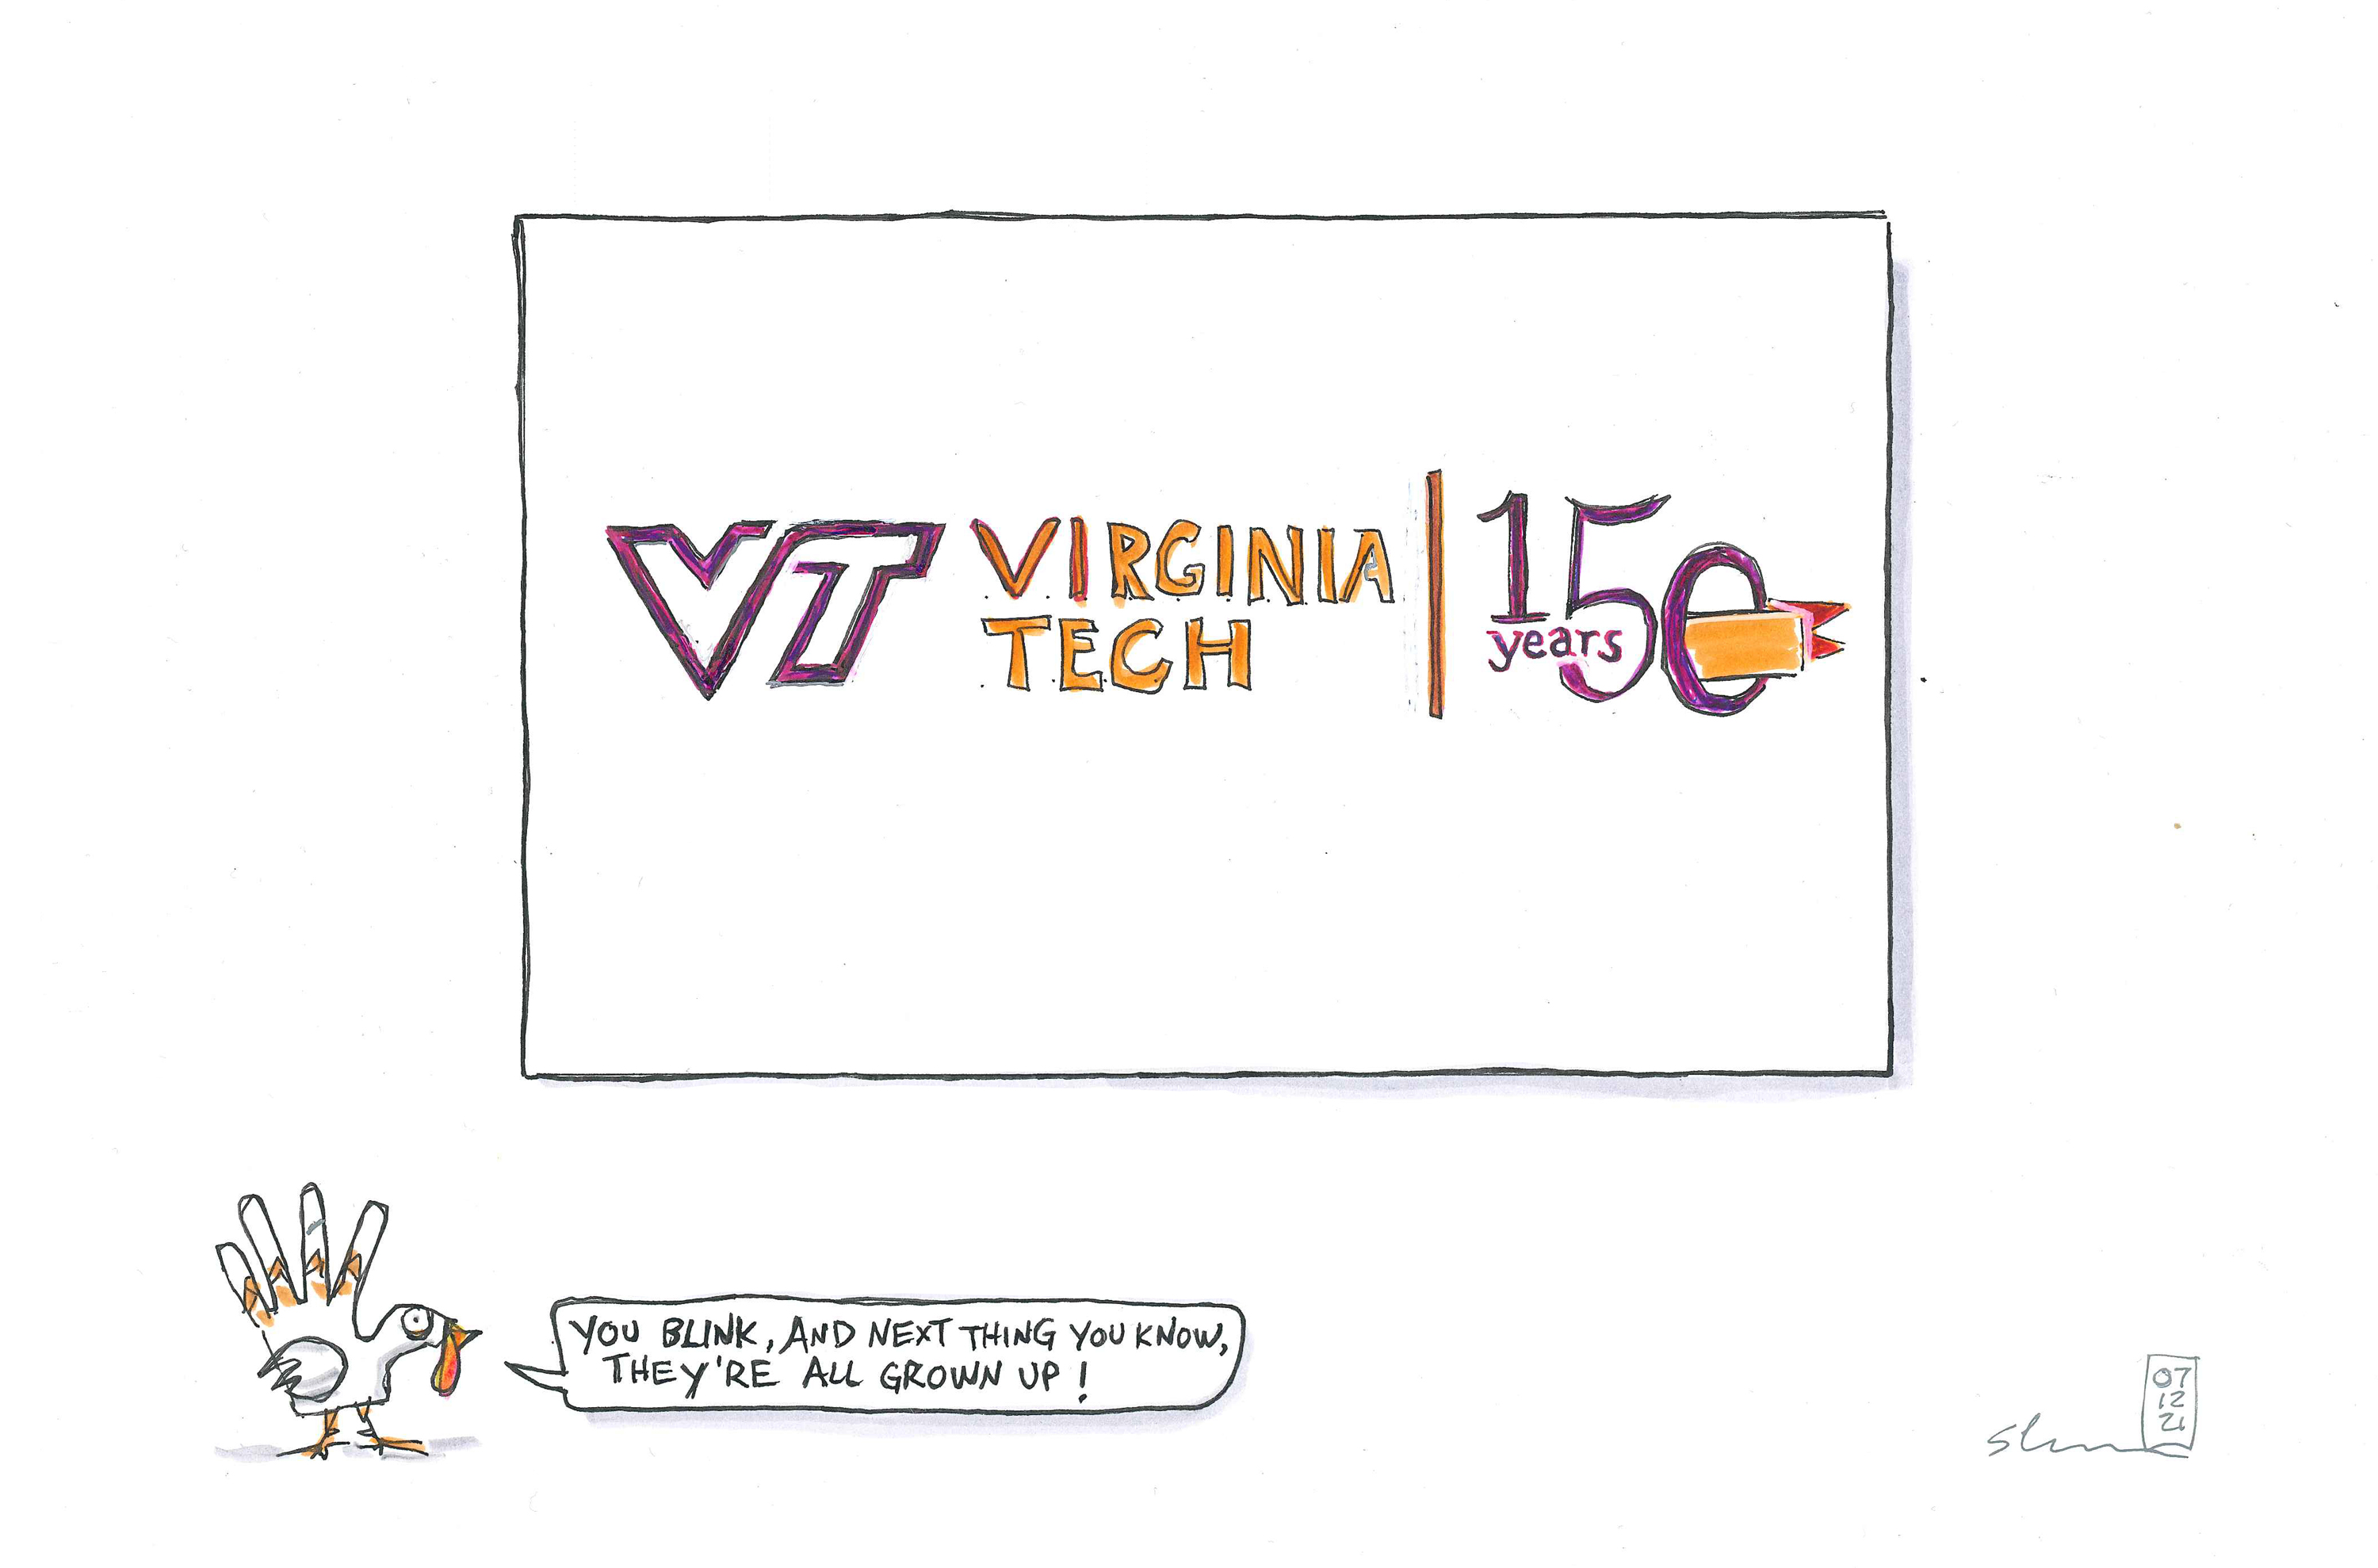 Sketch in ink and watercolor of 150 years sesquicentennial logo